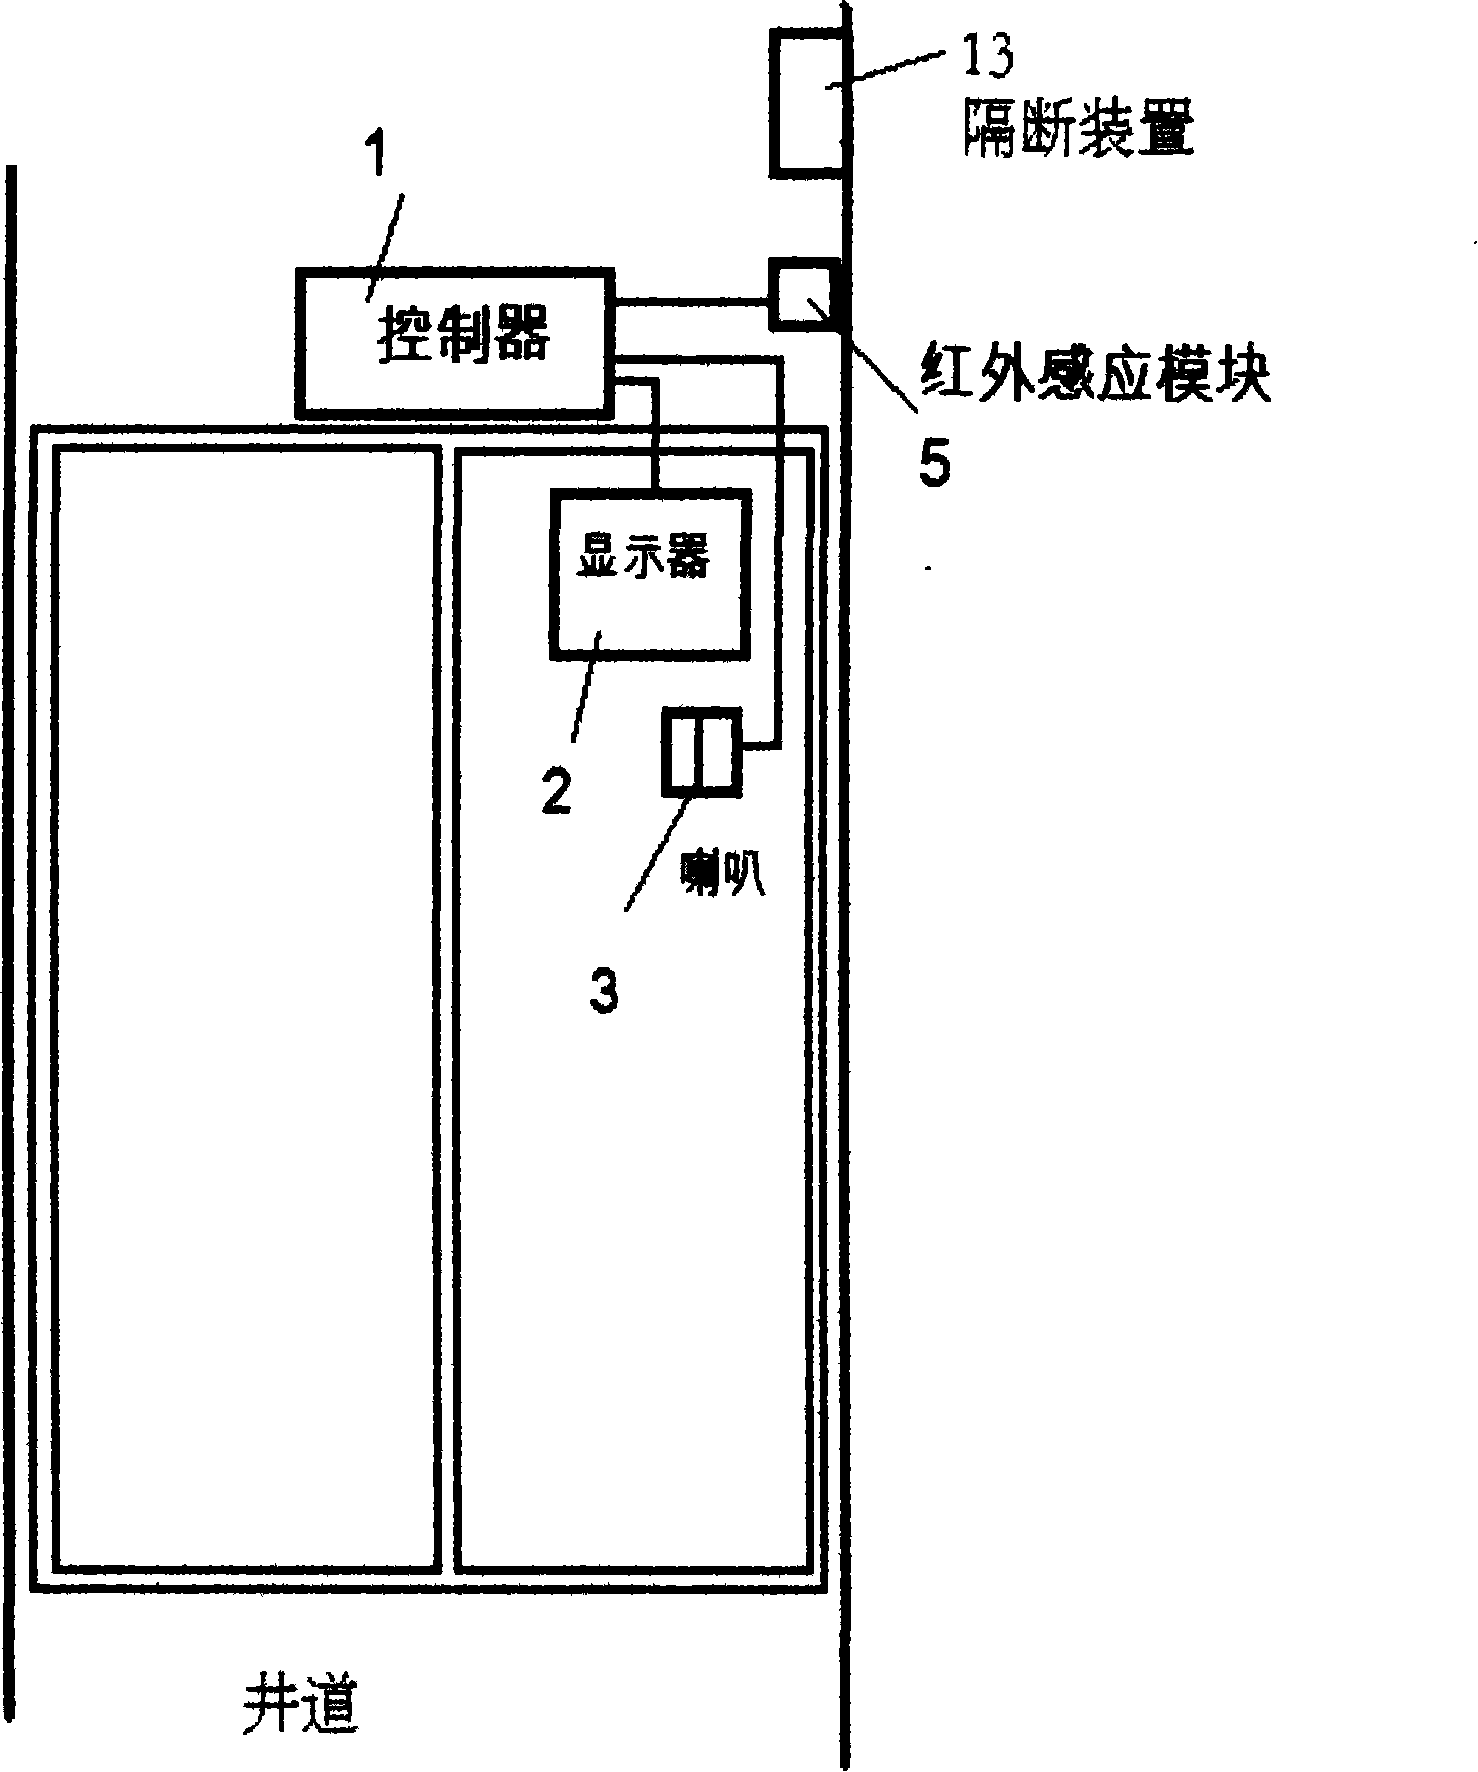 Elevator automatic broadcasting and video display multimedia advertisement method and device